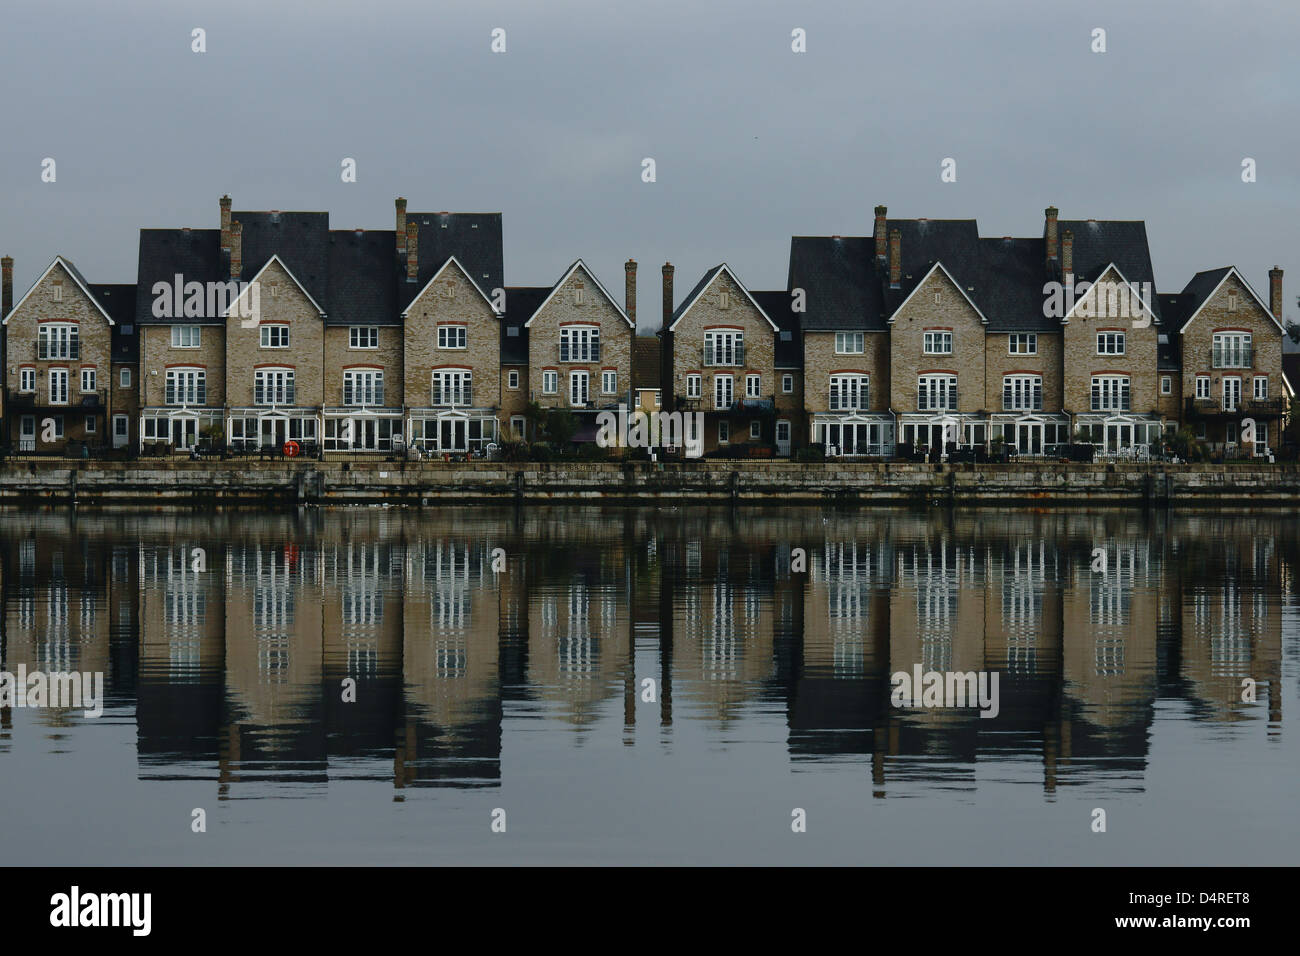 river medway chatham a typical english town house water reflection picture perfect new bulidings on the river edge Stock Photo